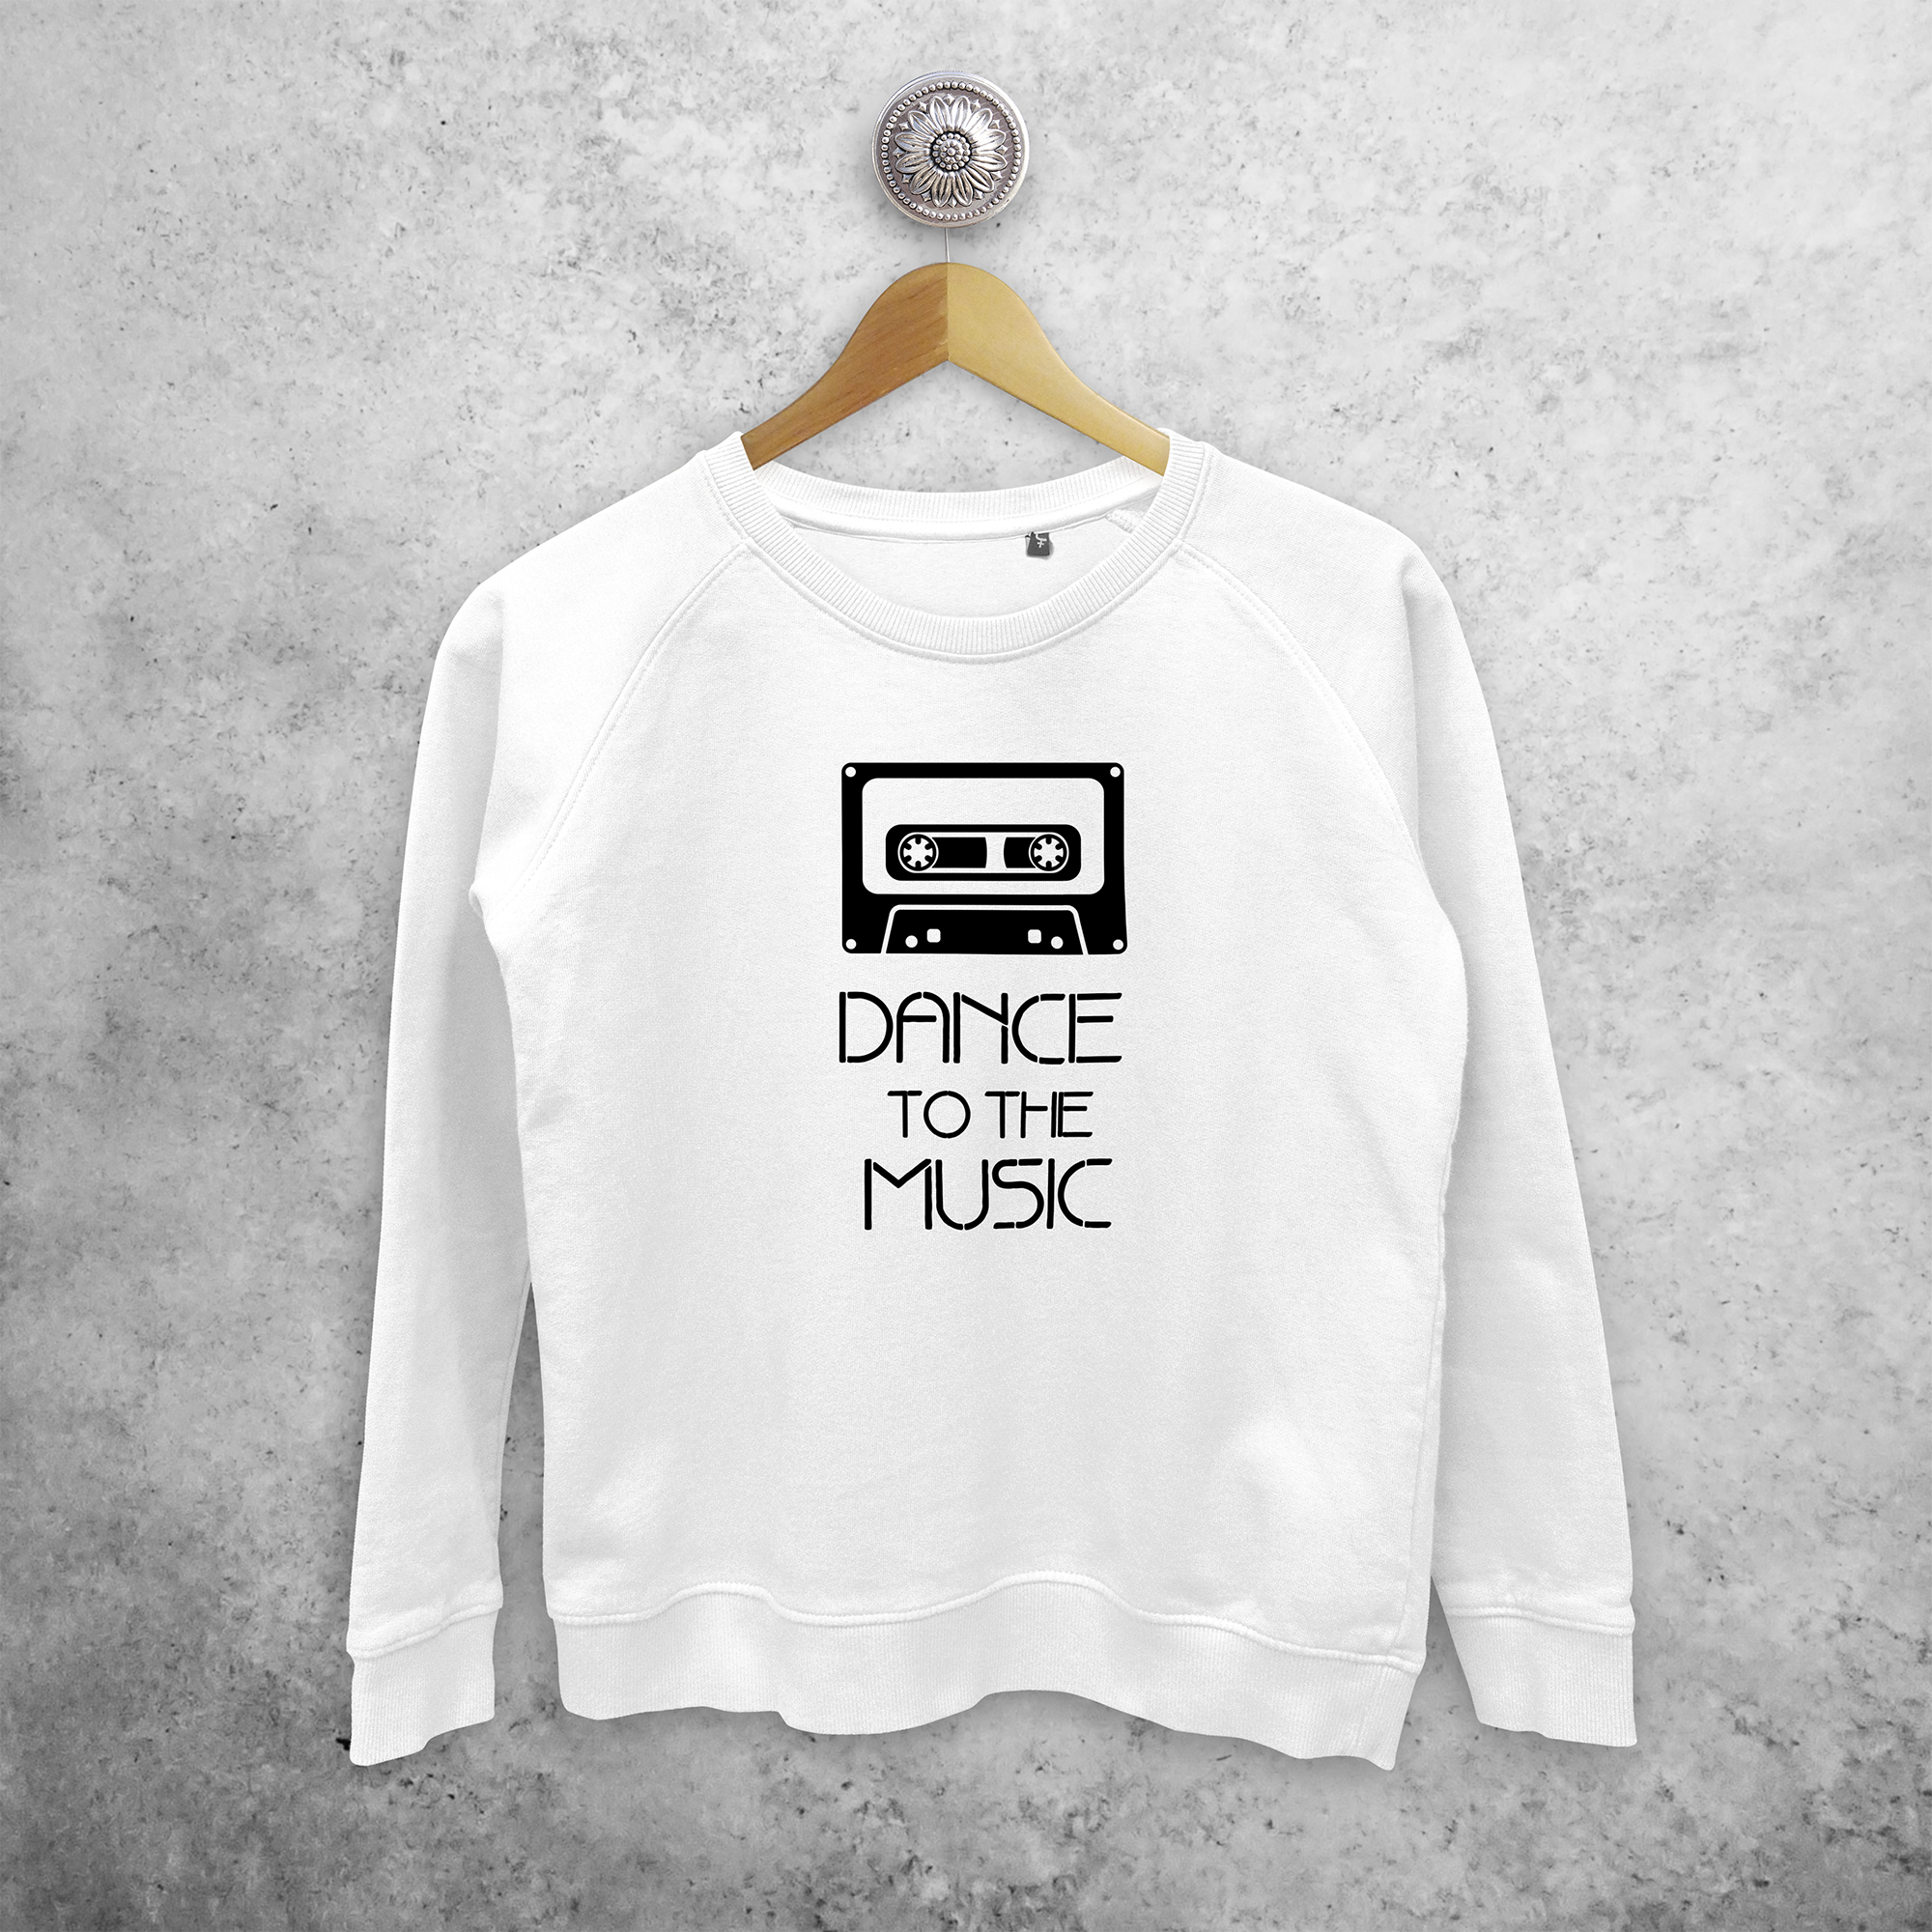 'Dance to the music' sweater